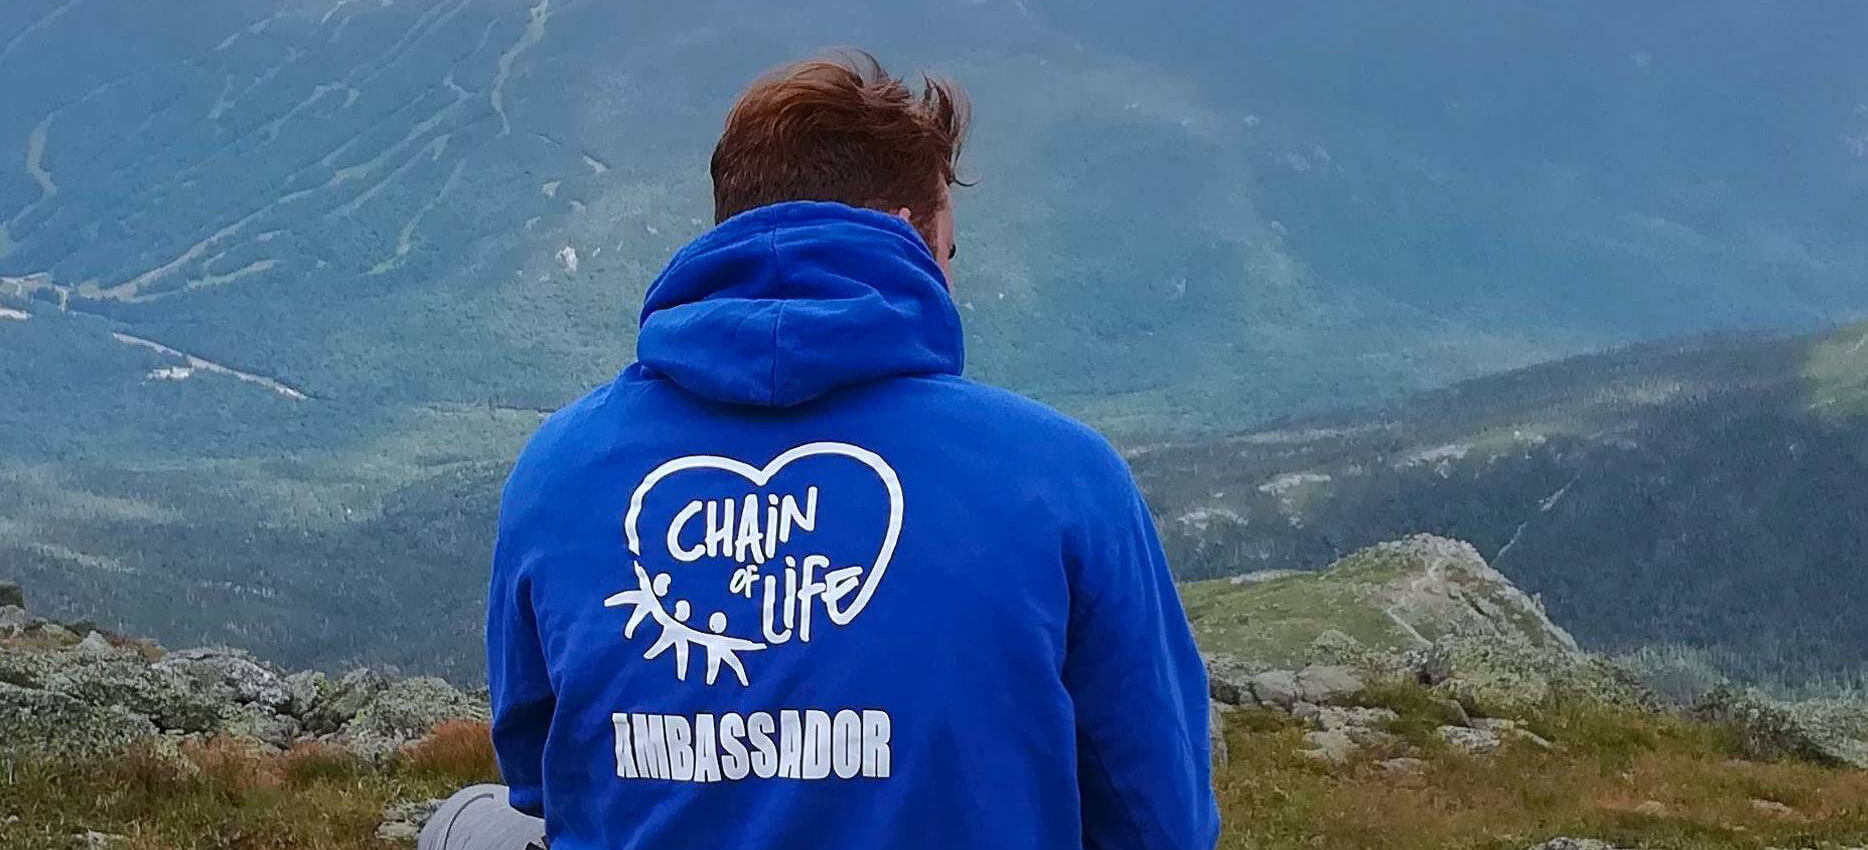 Climbing Mountains for Organ Donation and Health!